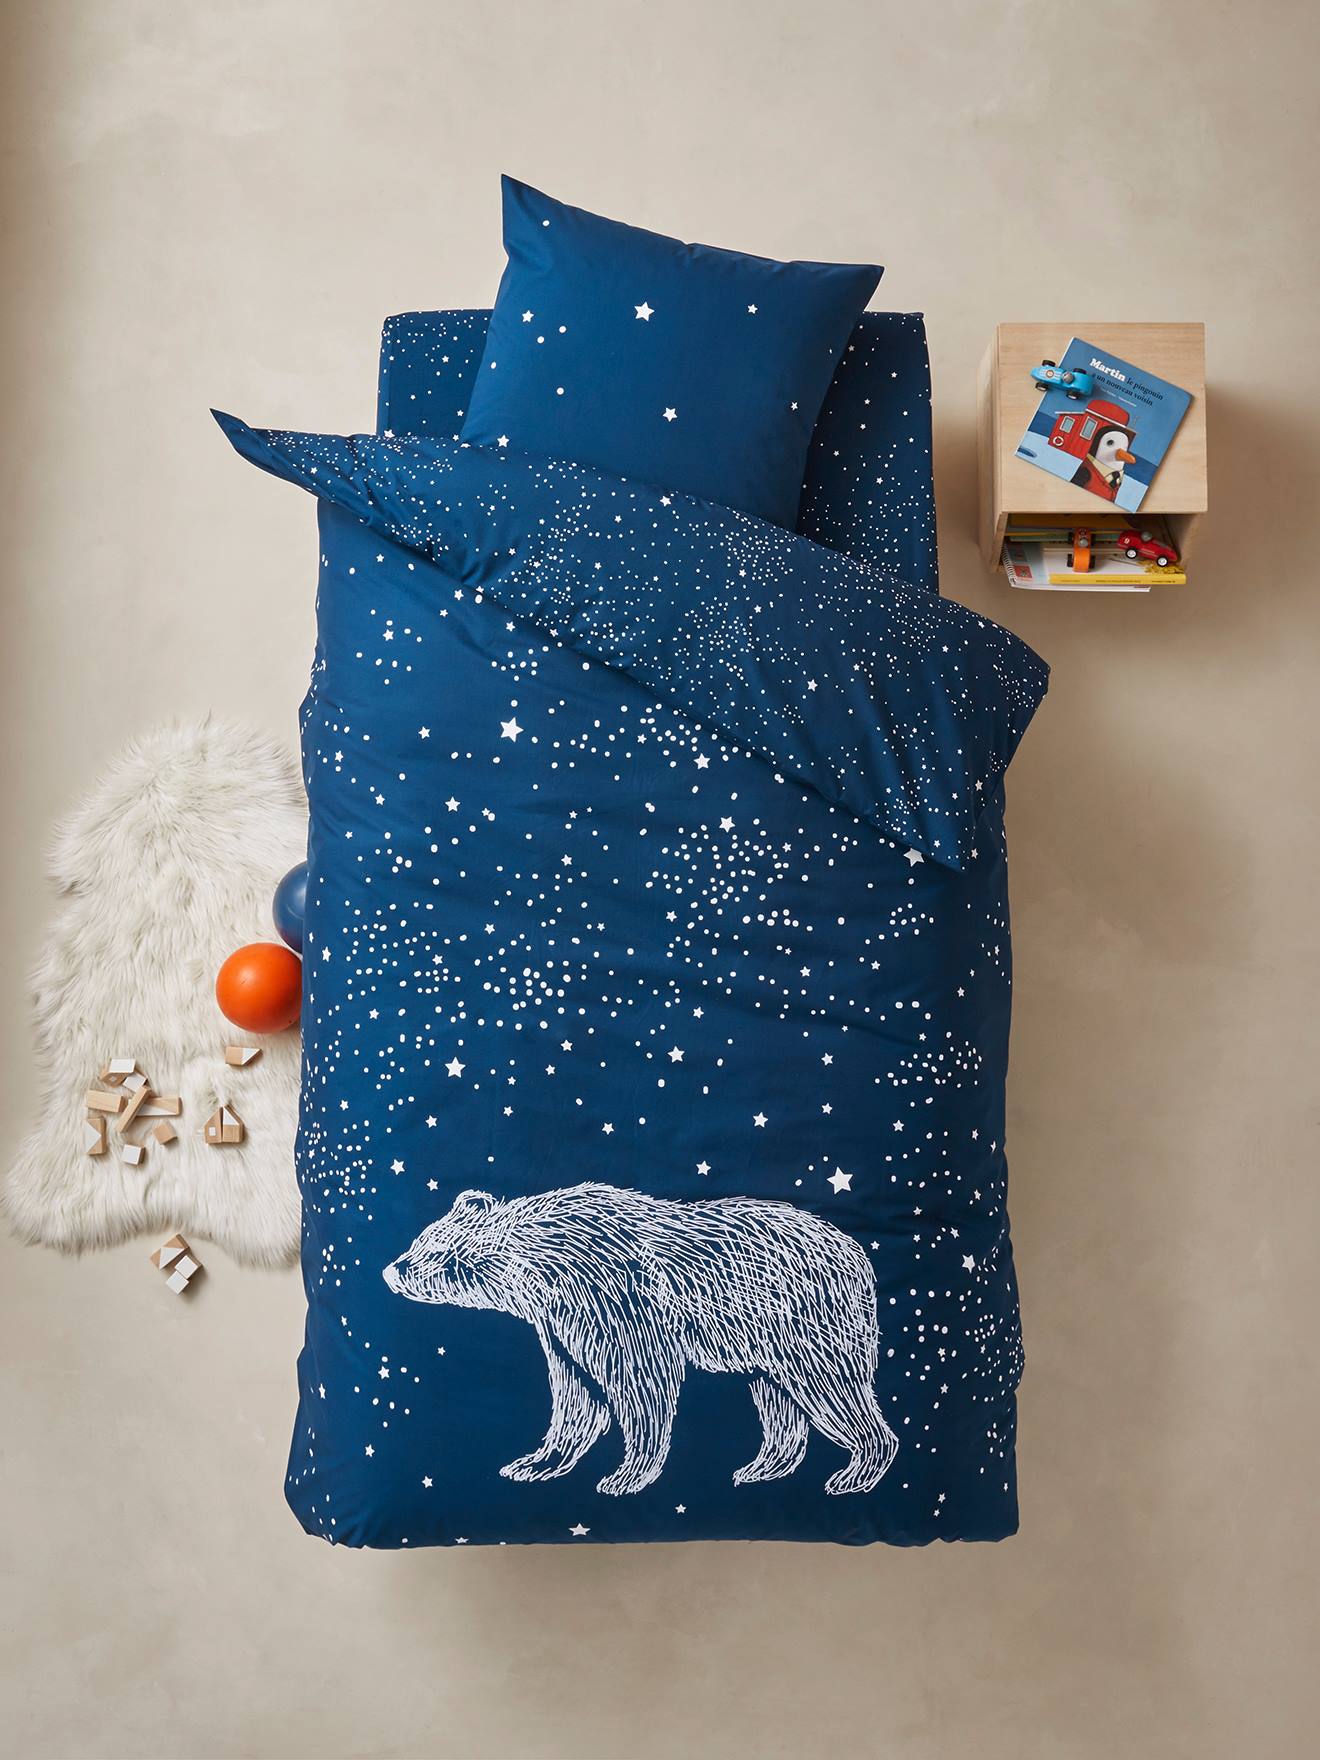 Duvet Cover Pillowcase Set For, Space Glow In The Dark Duvet Cover And Pillowcase Set